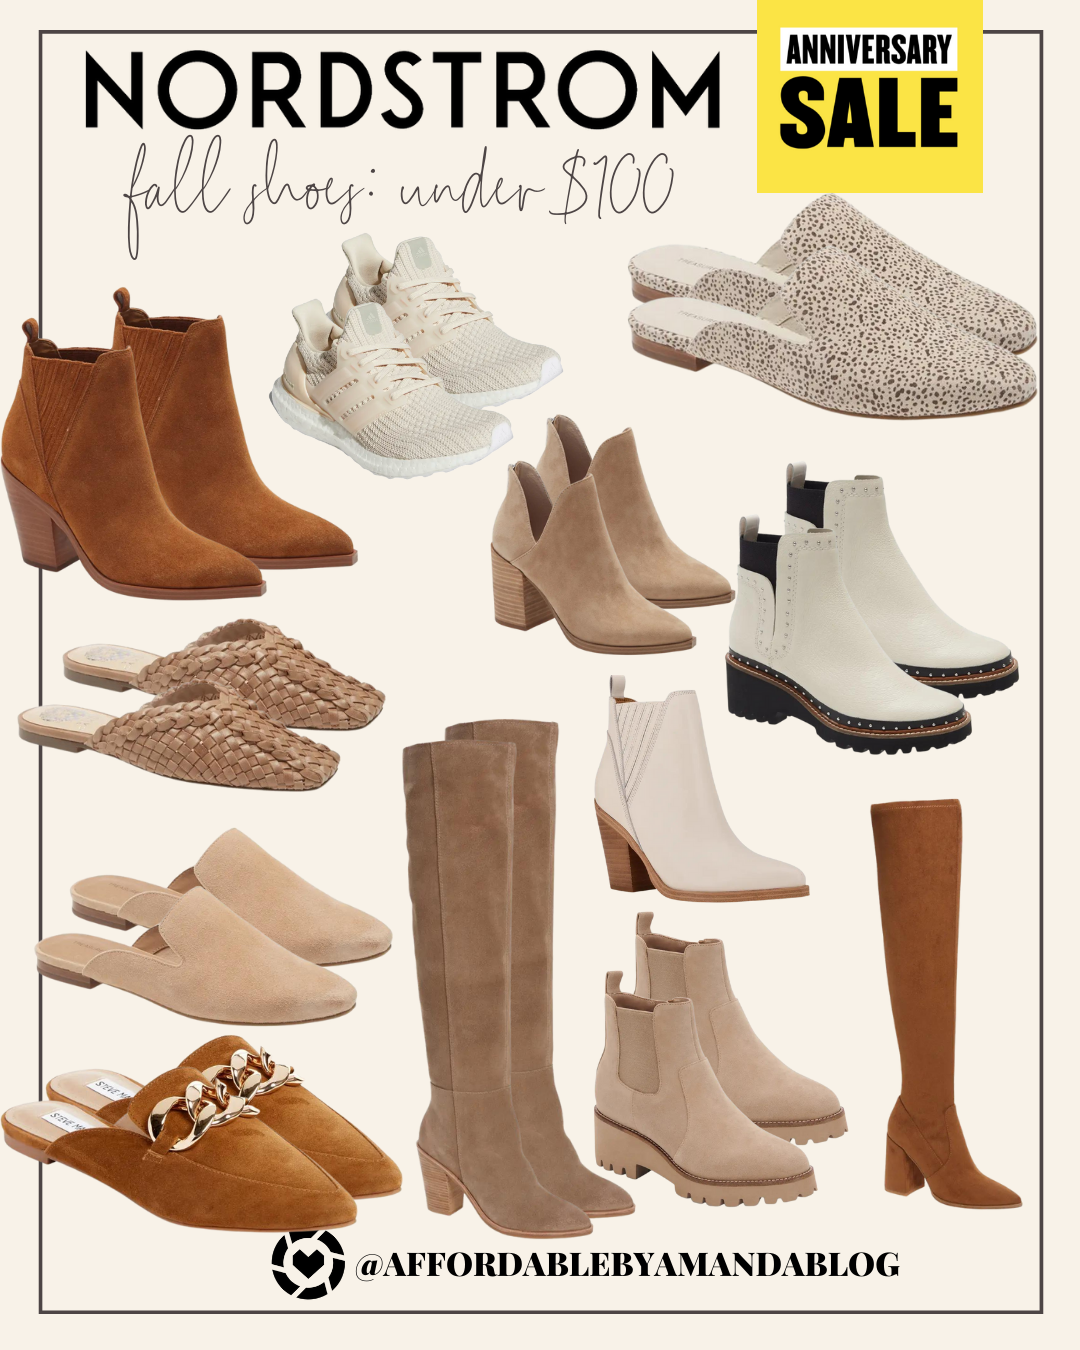 Fall Shoe Trends 2021. Fall Shoes for Women. Fall/Winter 2021 Shoe Trends - Affordable by Amanda